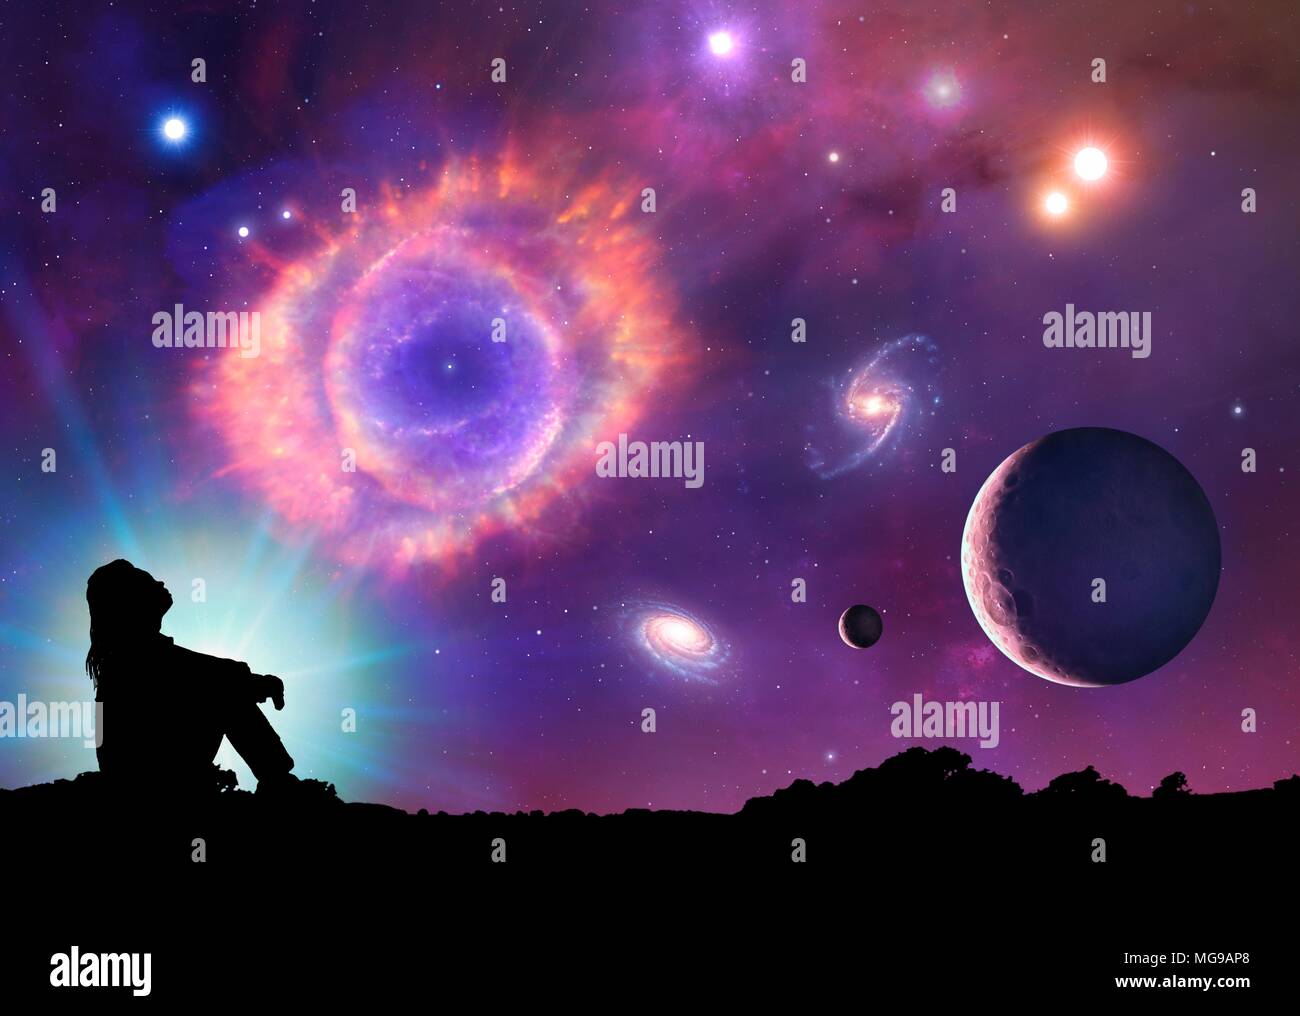 This is a conceptual illustration representing space and astronomy in general. It shows the various objects that can be found in the Universe: planets, moons, stars, nebulae and galaxies. The centrepiece is a planetary nebula, the cast-off remains of a dying star. A woman in silhouette is seen looking up into space. Stock Photo